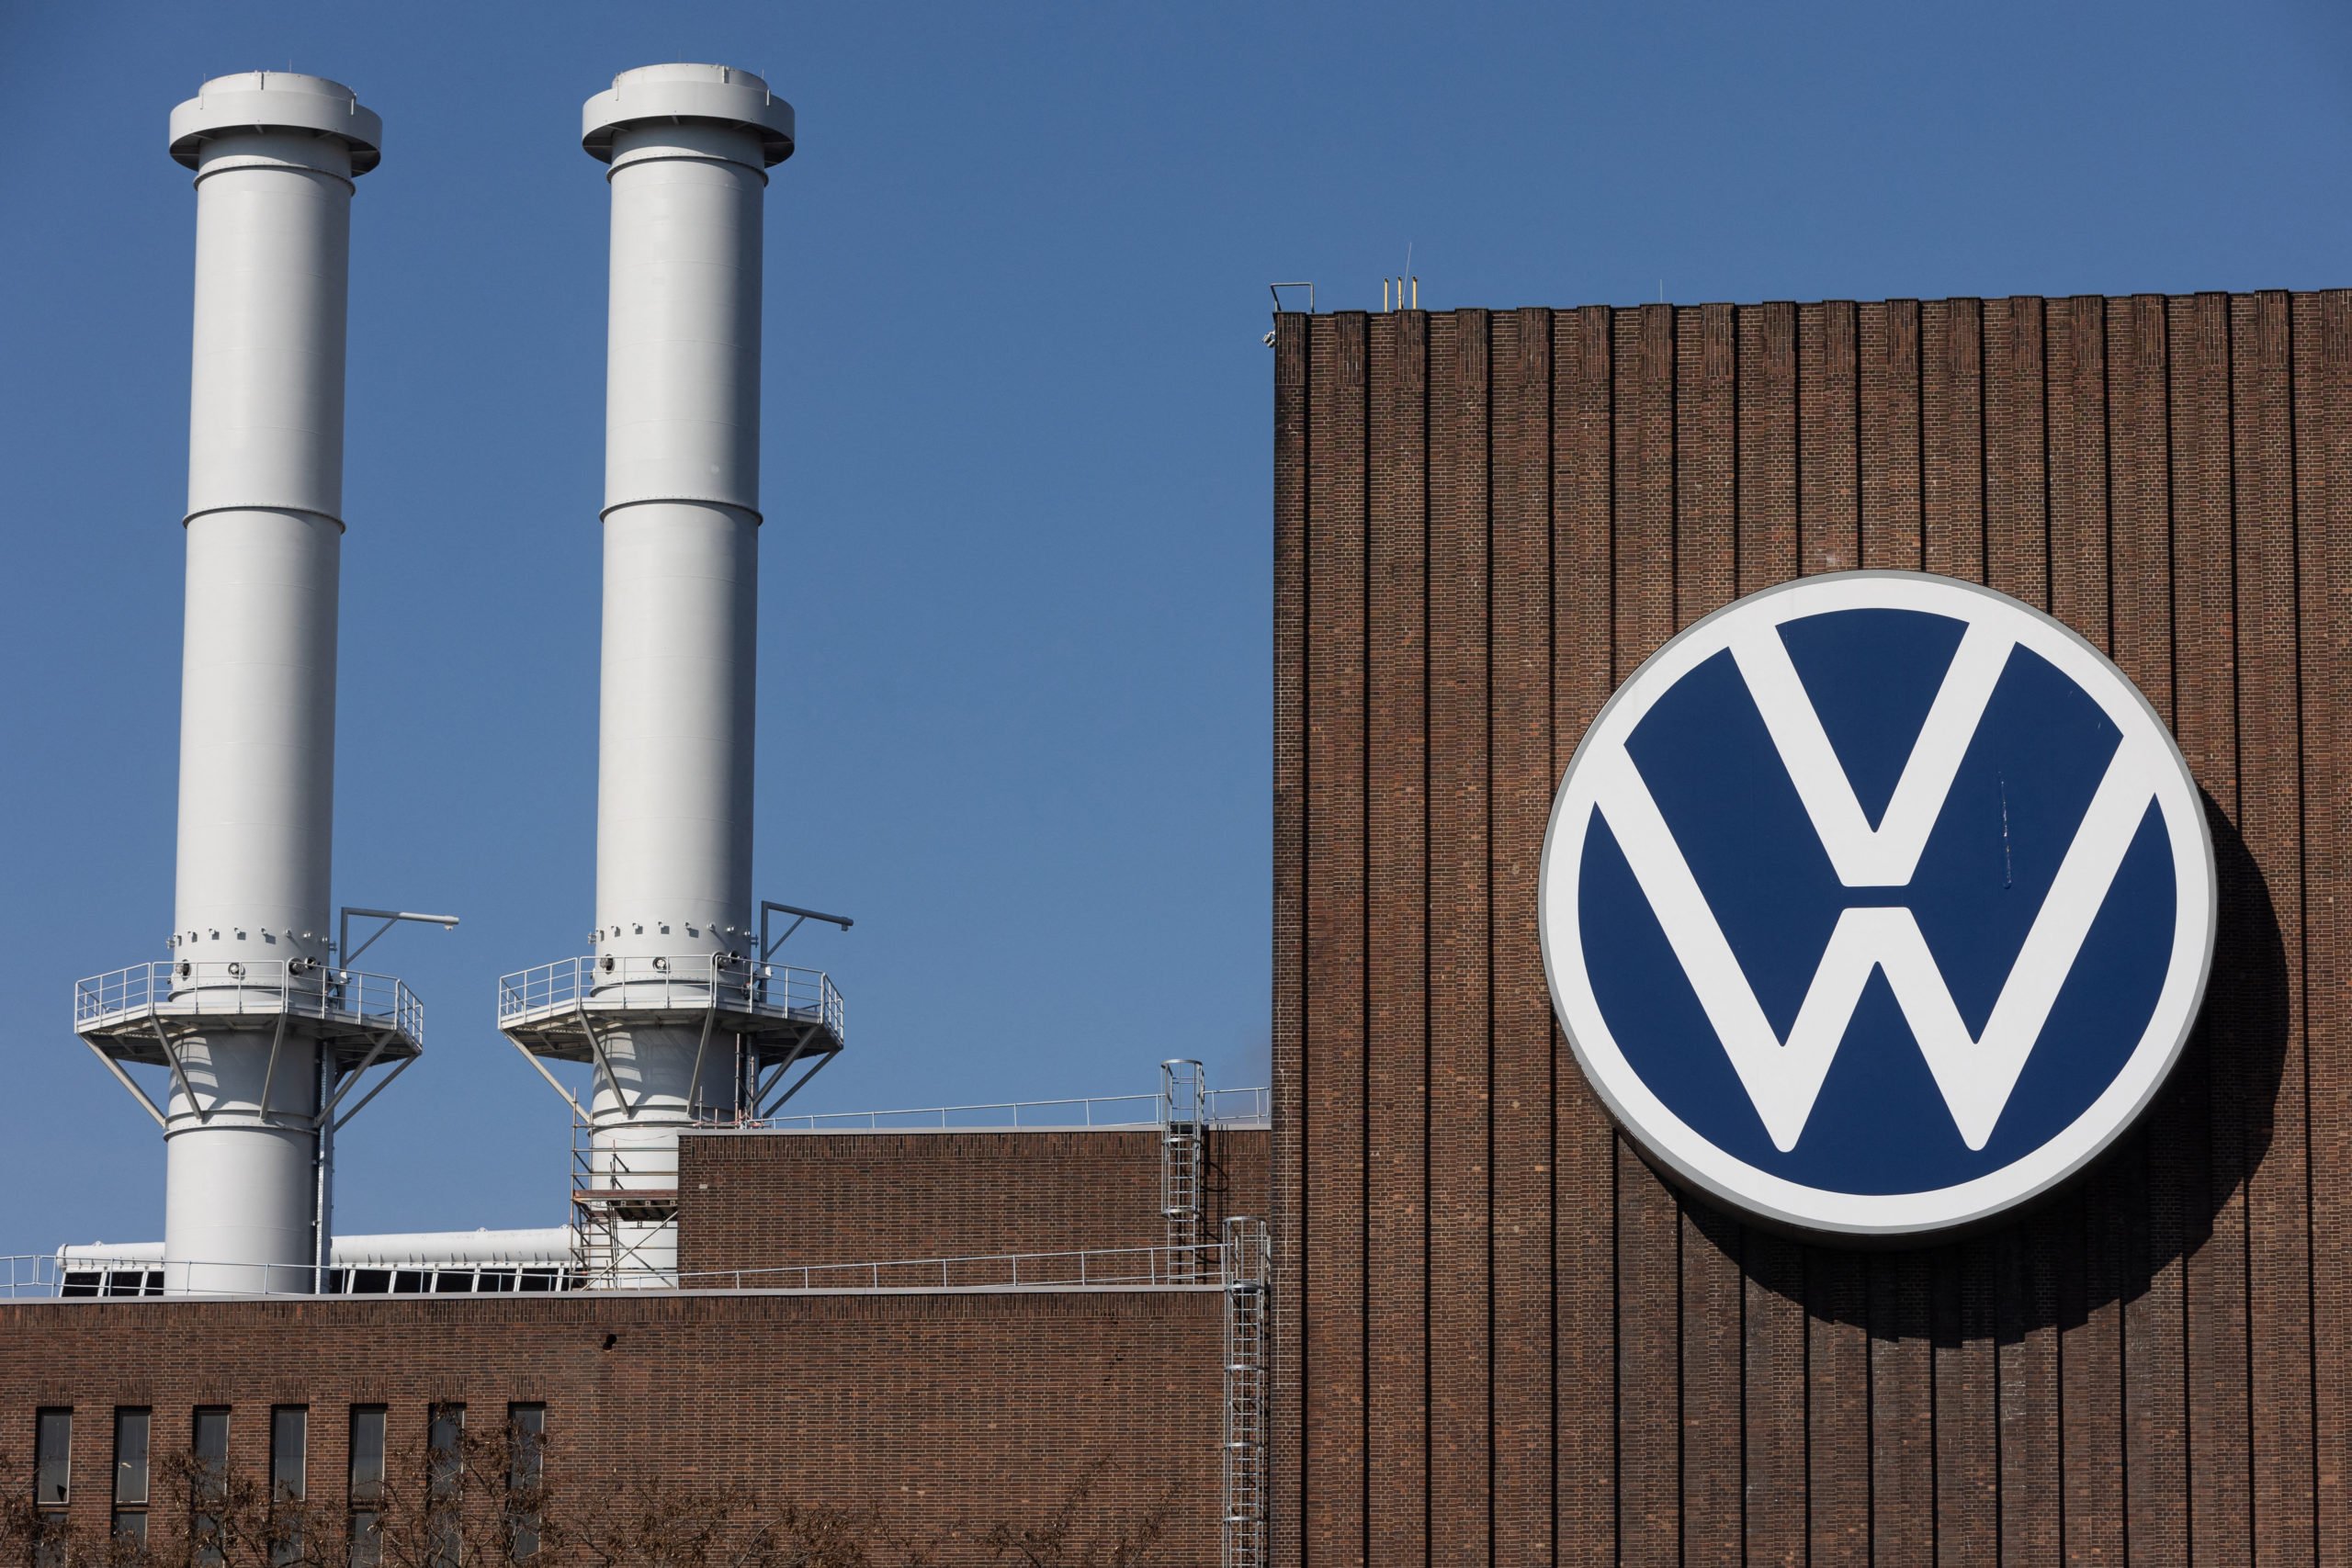 The logo of German carmaker Volkswagen (VW) is pictured on the main plant of the group in Wolfsburg, northern Germany.